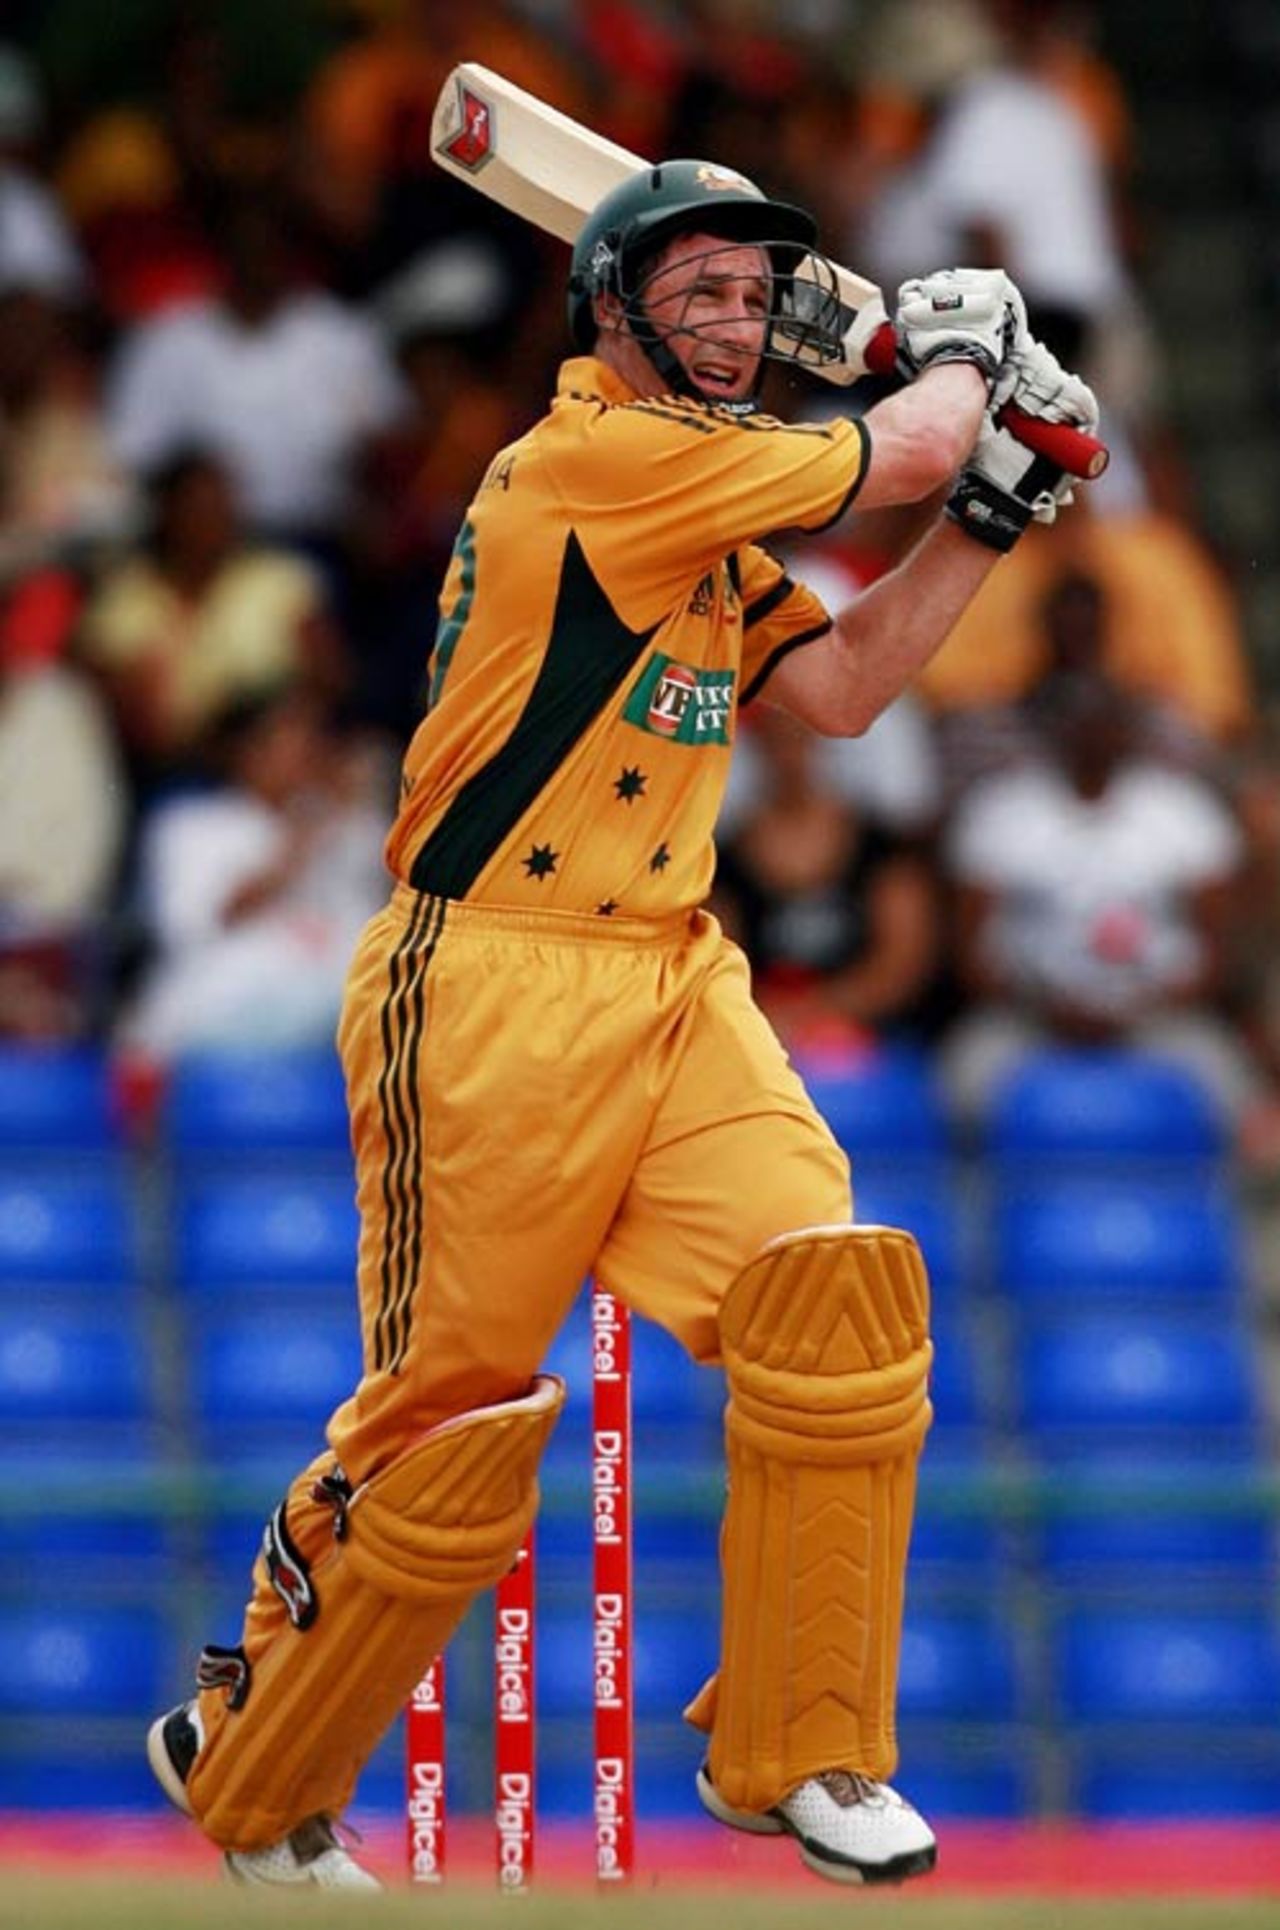 David Hussey slams his first six in international cricket, West Indies v Australia, 4th ODI, St Kitts, July 4, 2008